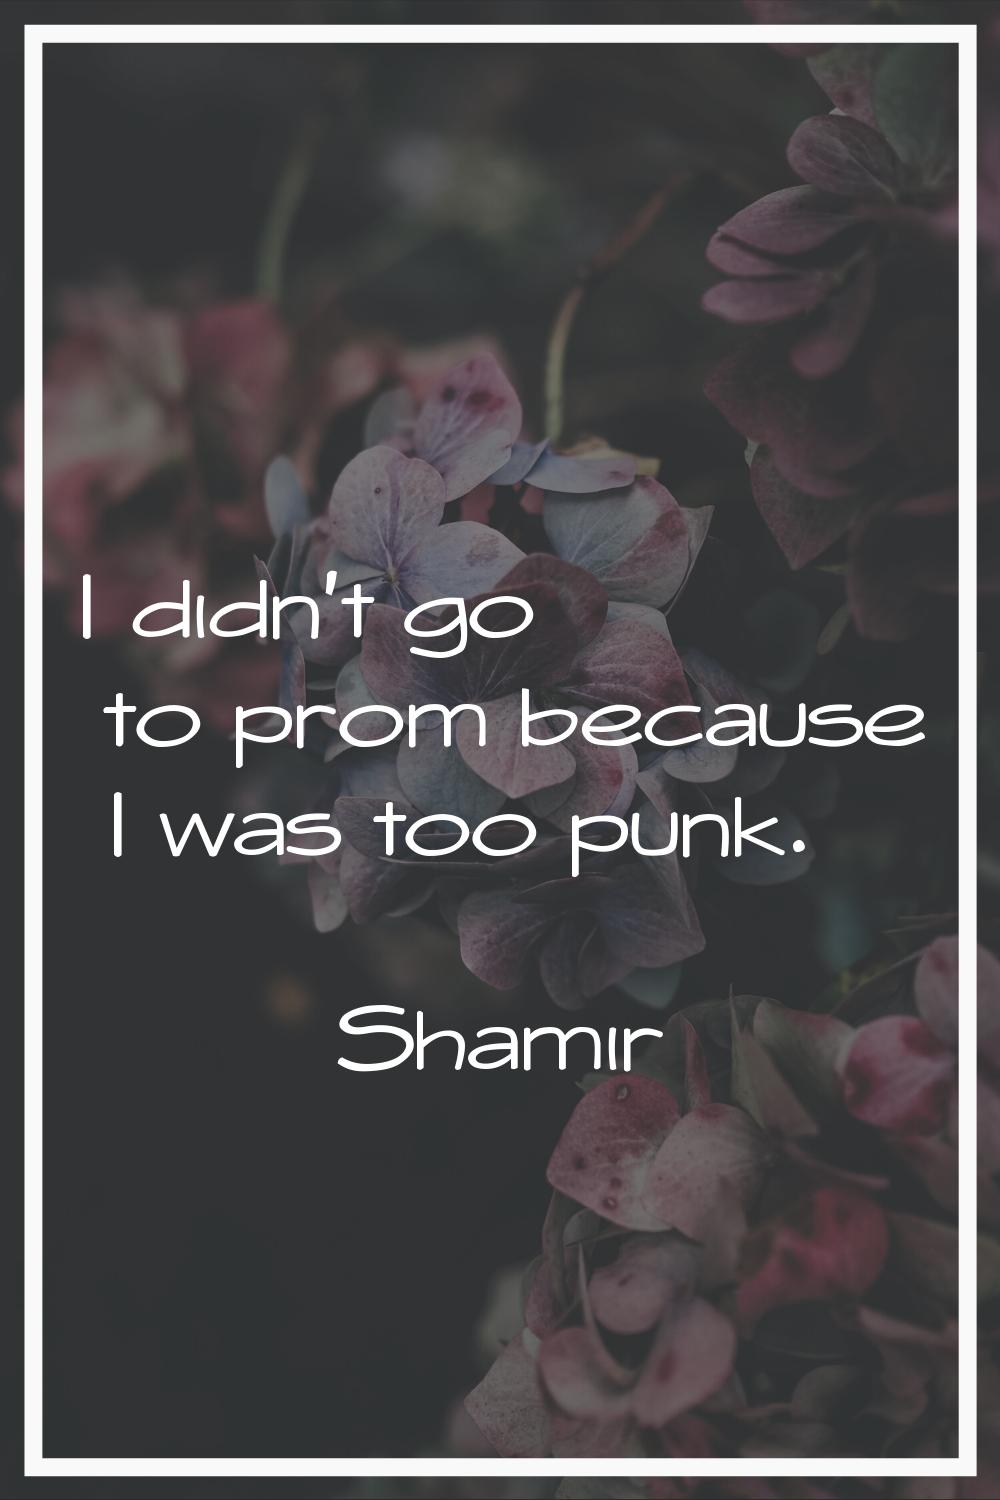 I didn't go to prom because I was too punk.